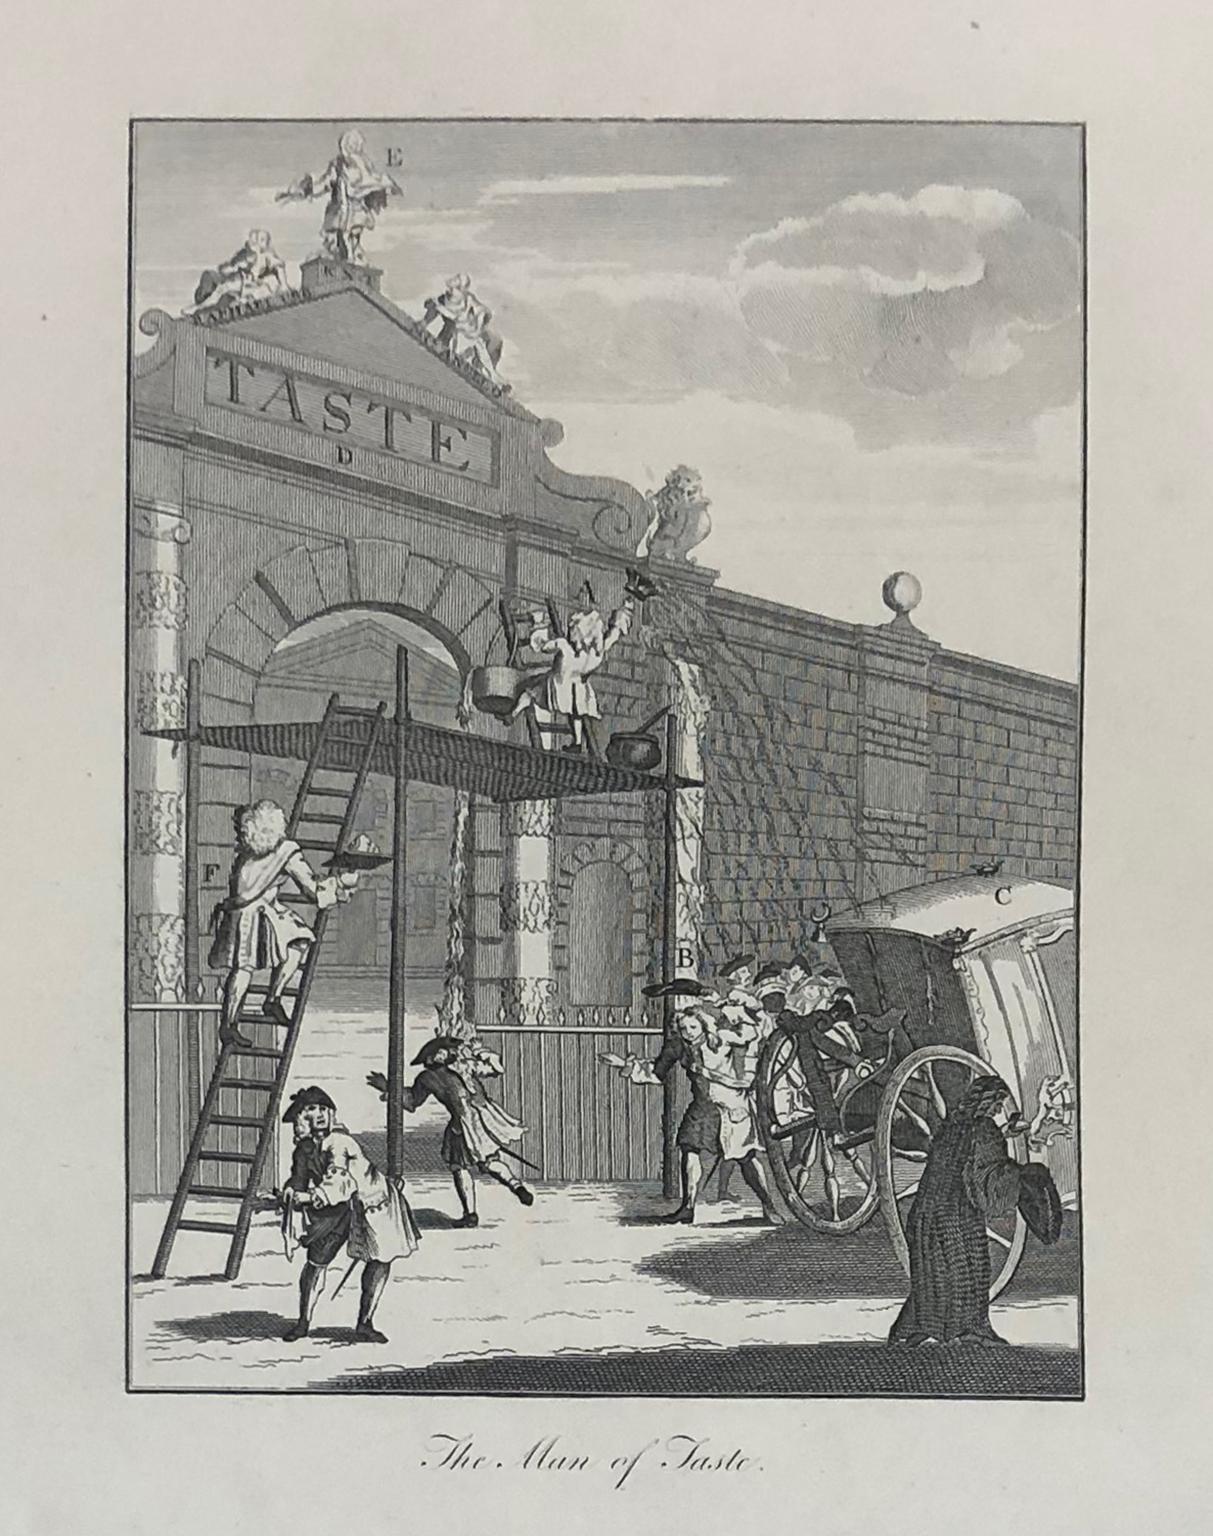 William Hogarth (1697-1764) The Man of Taste / Rich's Triumphant Entry 
From The Works Of William Hogarth, From The Original Plates Restored By James Heath, Esq. R.A.; With The Addition Of Many Subjects Not Before Collected; To Which Are Prefixed, A